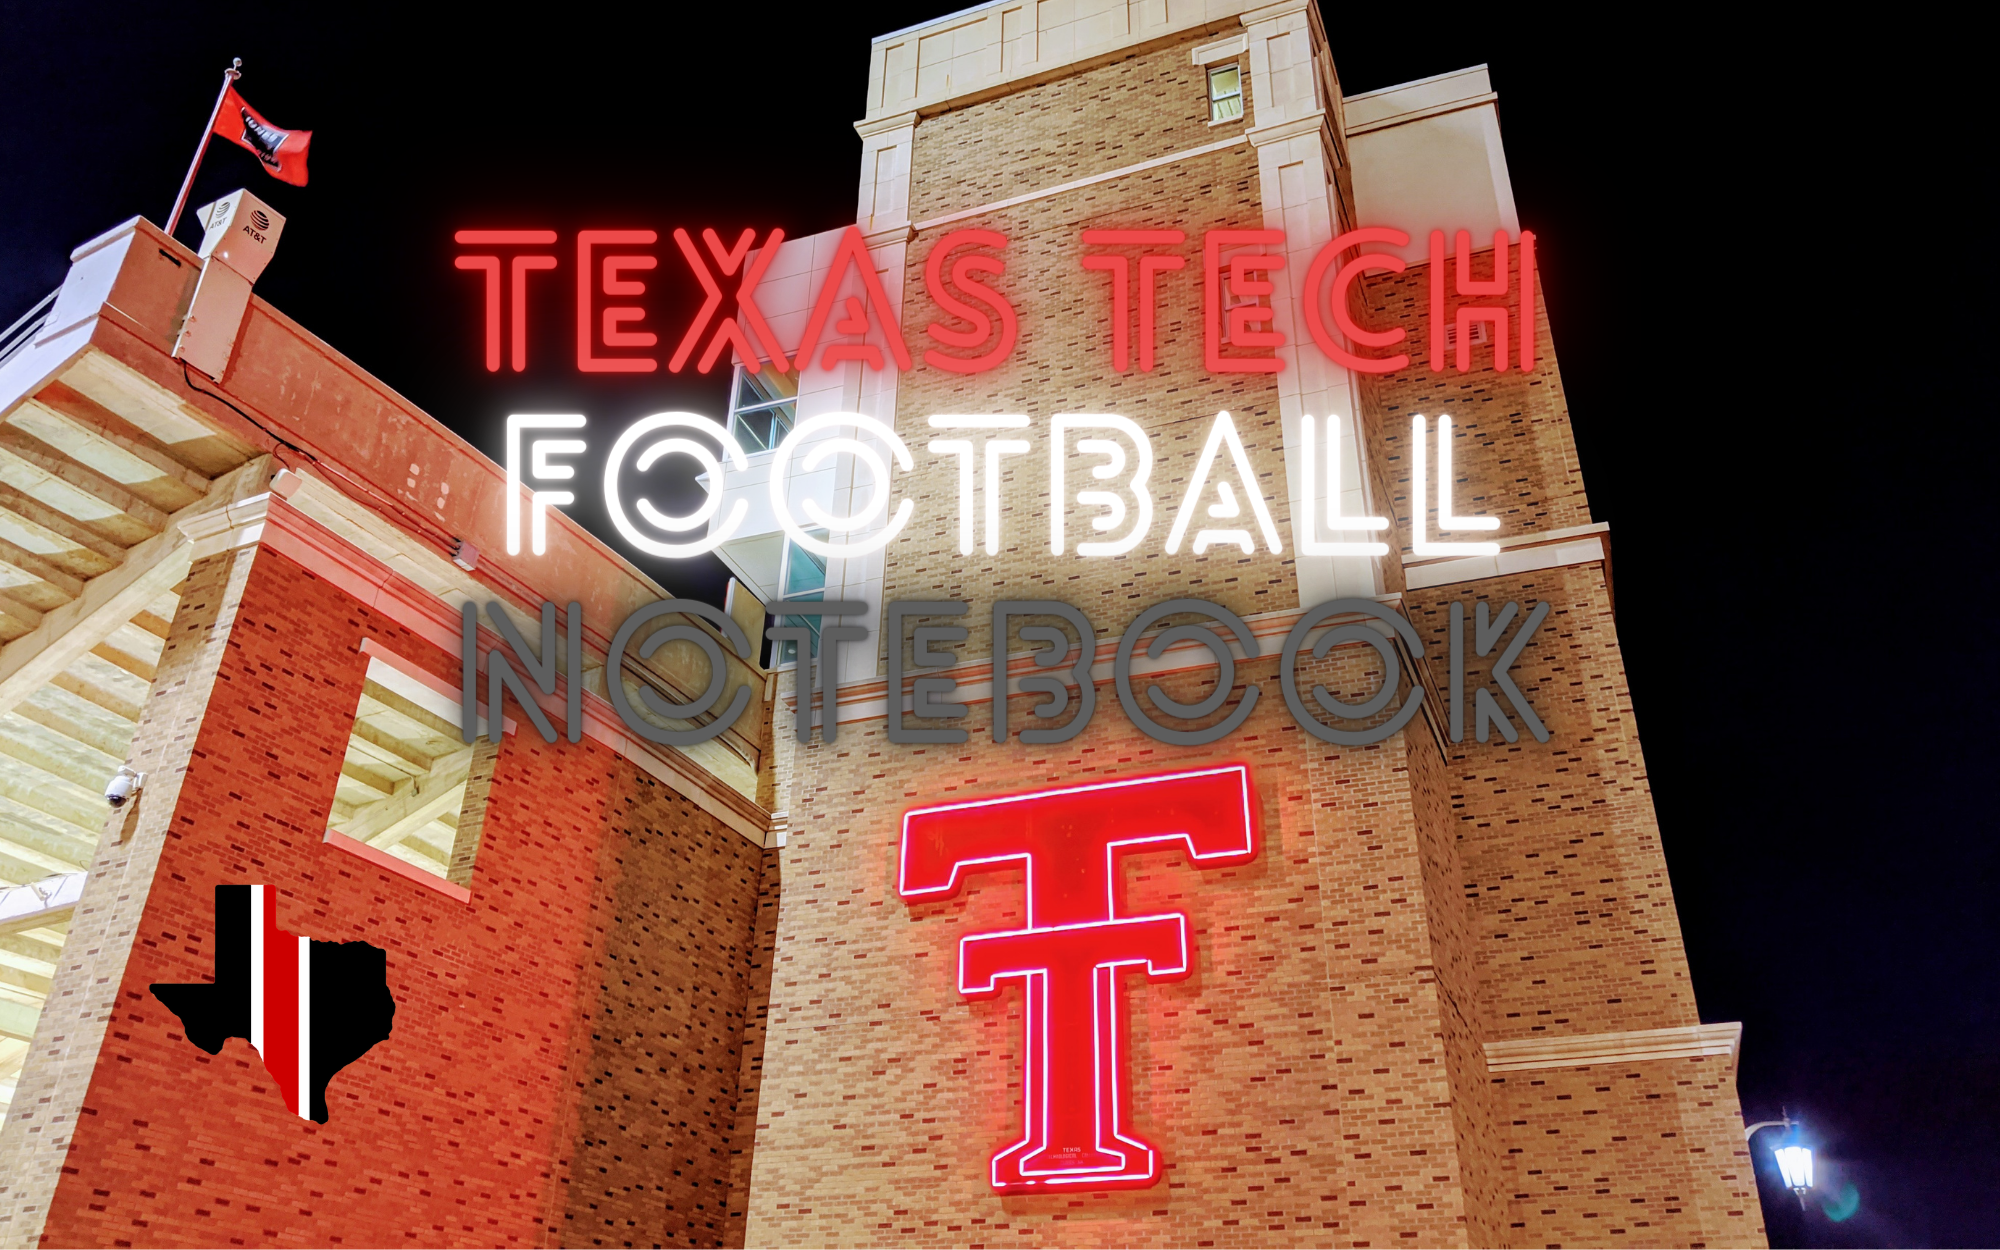 Texas Tech Football Notebook: Thoughts on a Weekend Not Watching Sports